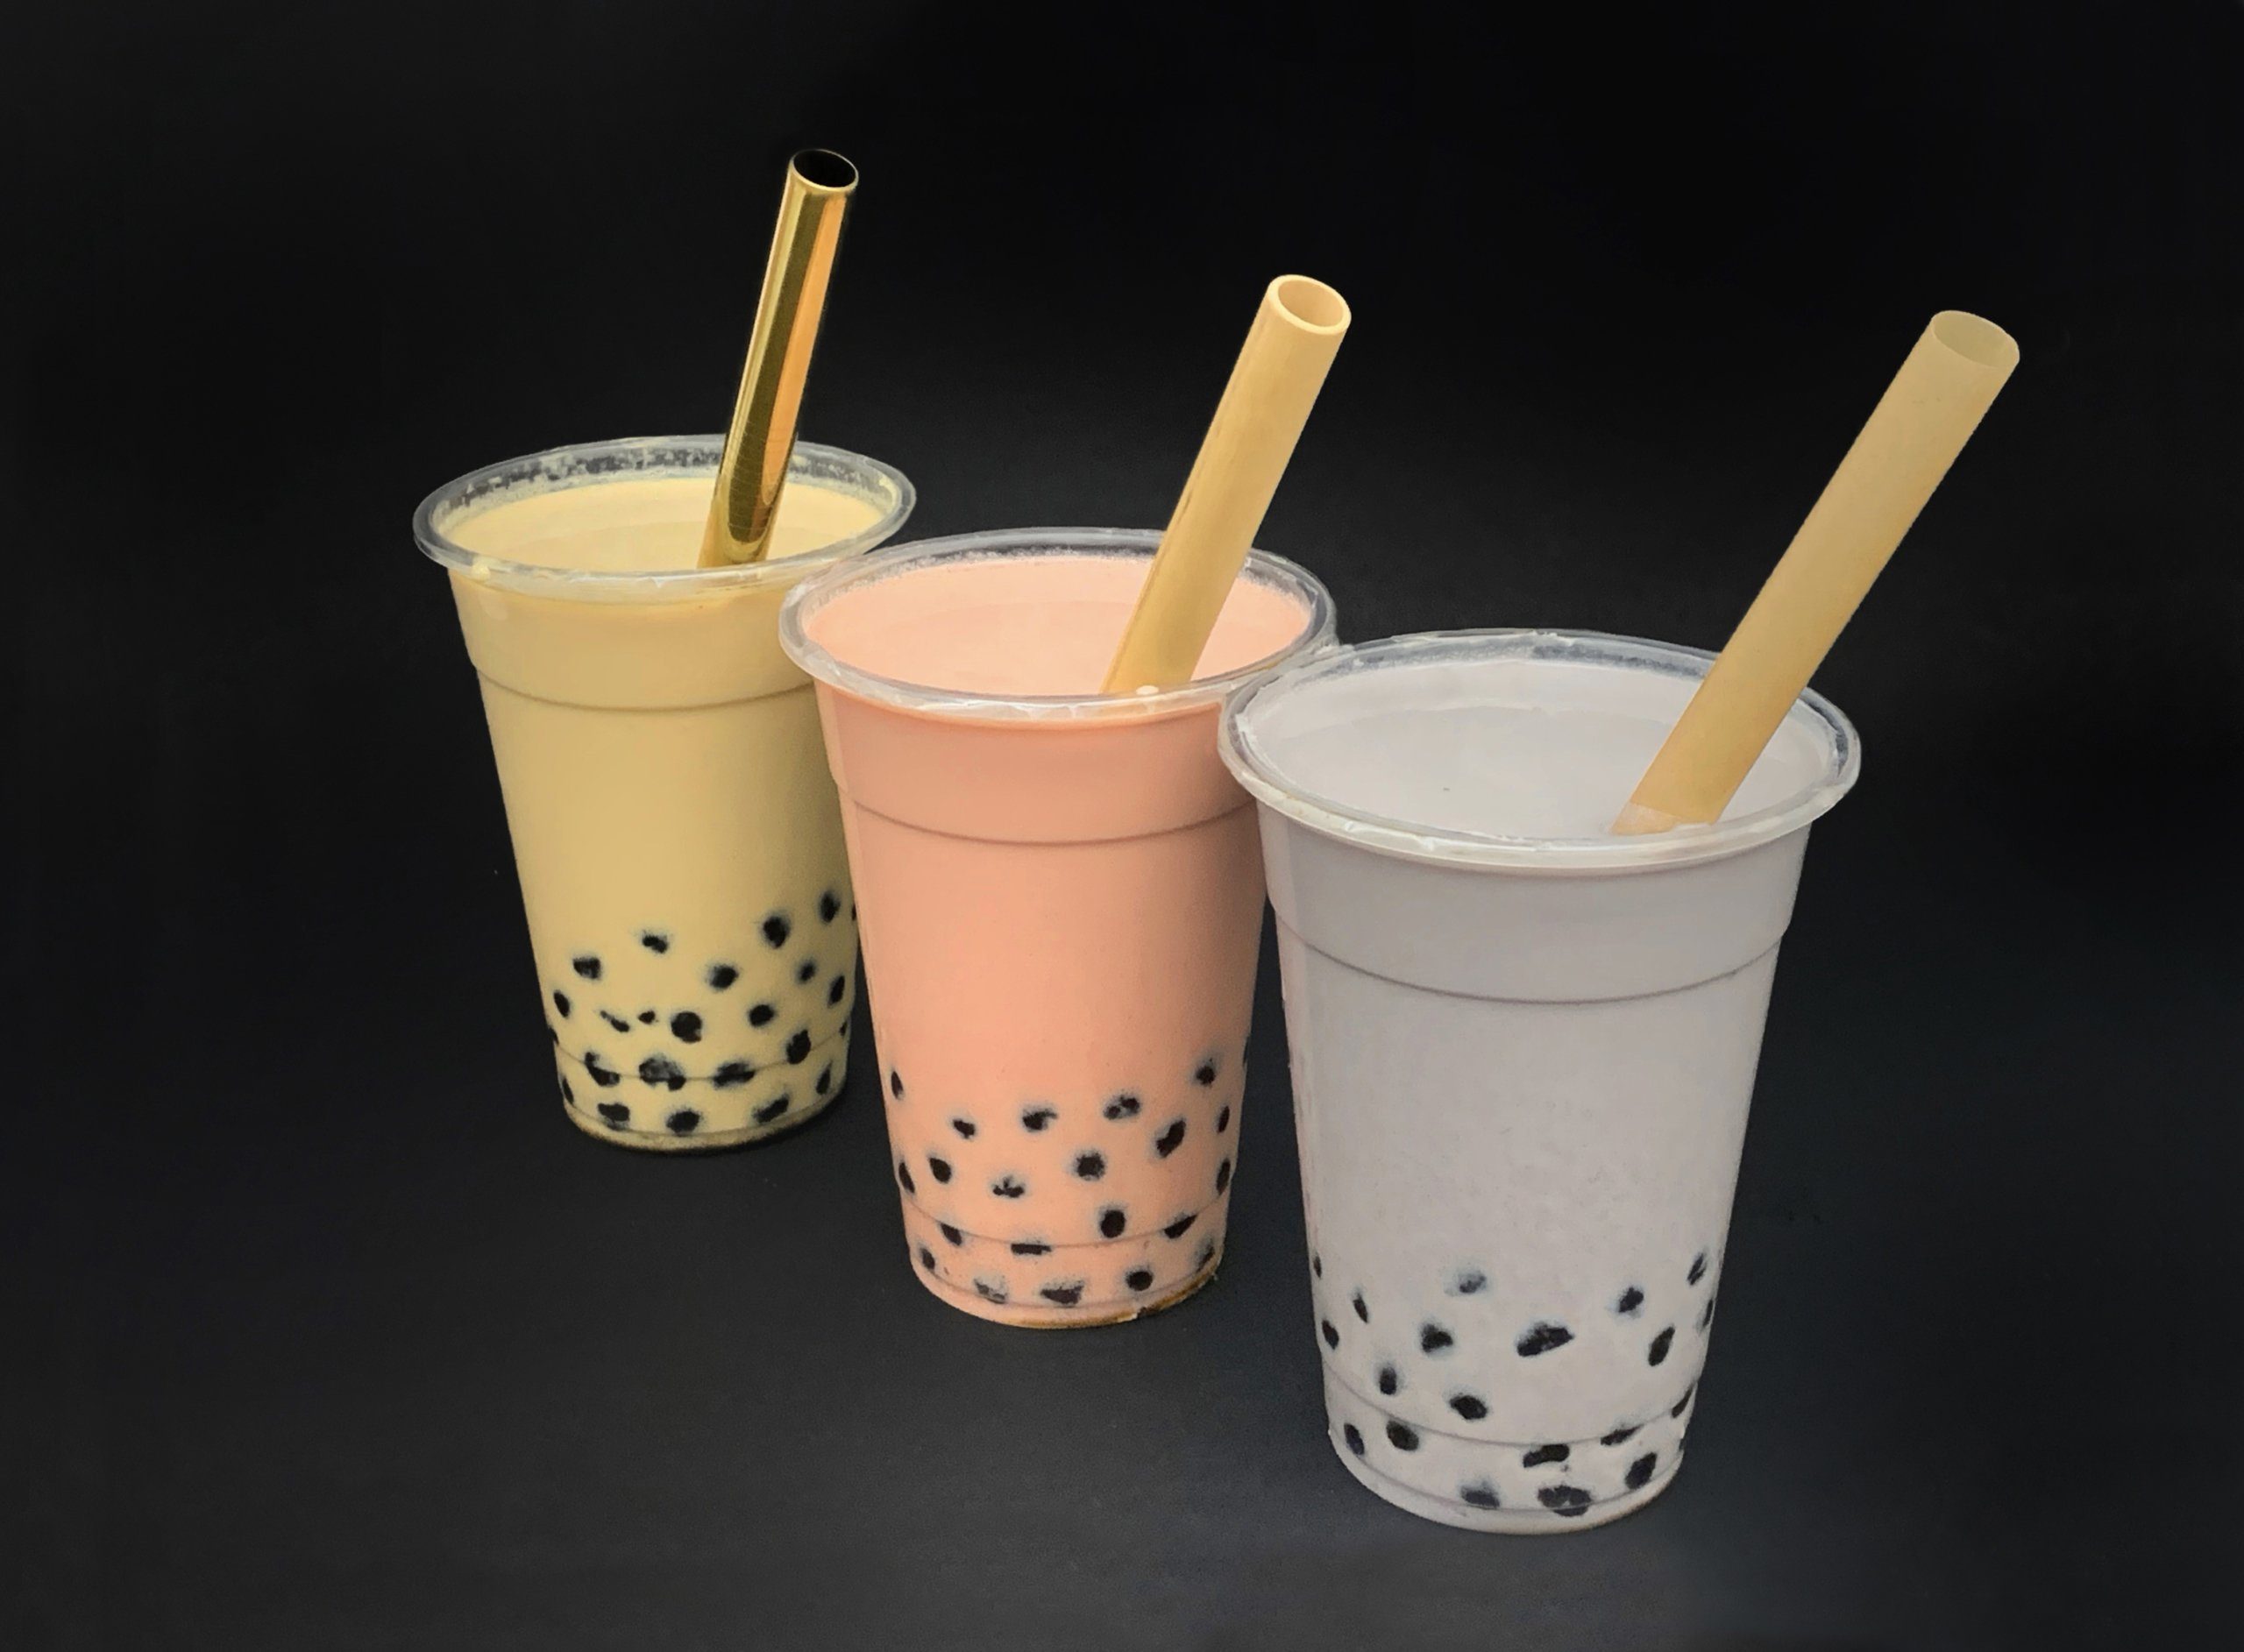 https://drinking-straw.com/wp-content/uploads/2021/05/Ecolo-bubble-tea-straw-_-trio-solution-scaled.jpg